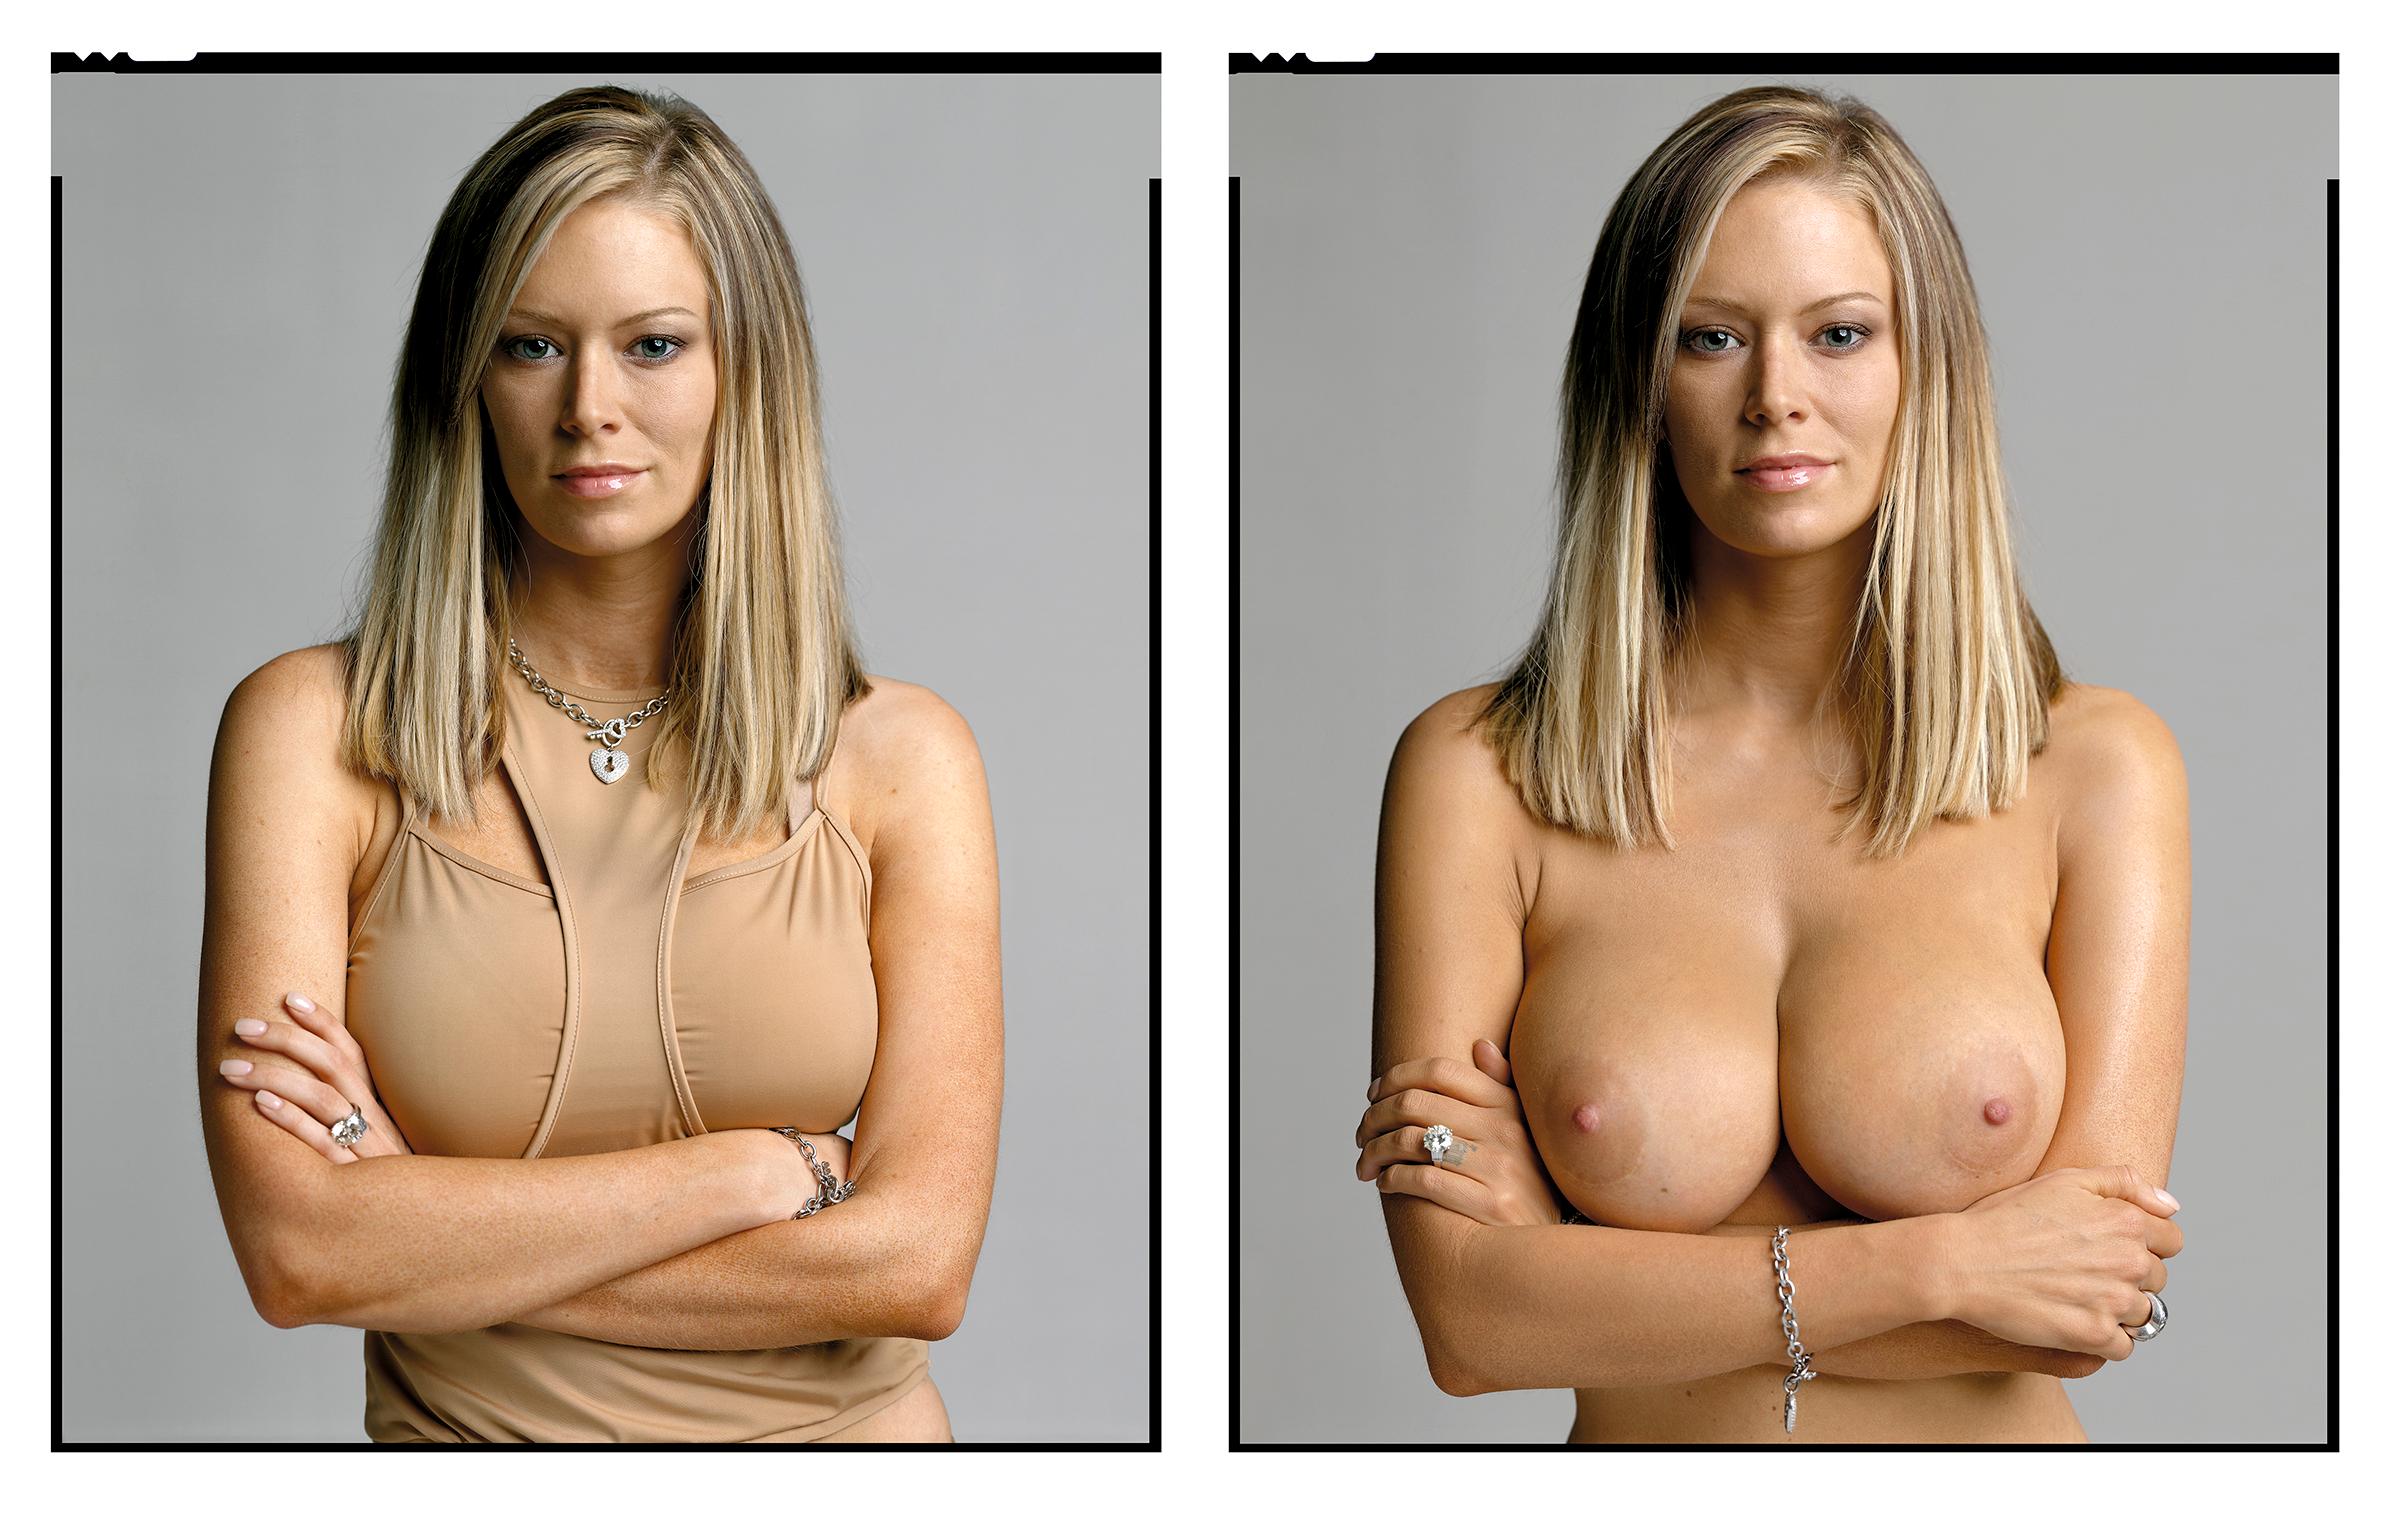 Artist: Timothy Greenfield-Sanders (1952)
Title: Jenna Jameson (Diptych-Clothed/Nude) from the XXX 30 PORN-STAR PORTRAITS SERIES
Year: 2004
Medium: Color Print
Edition: 6 plus 3 AP
Size: 20 x 16 inches each, 20 x 32 inches total
Condition: